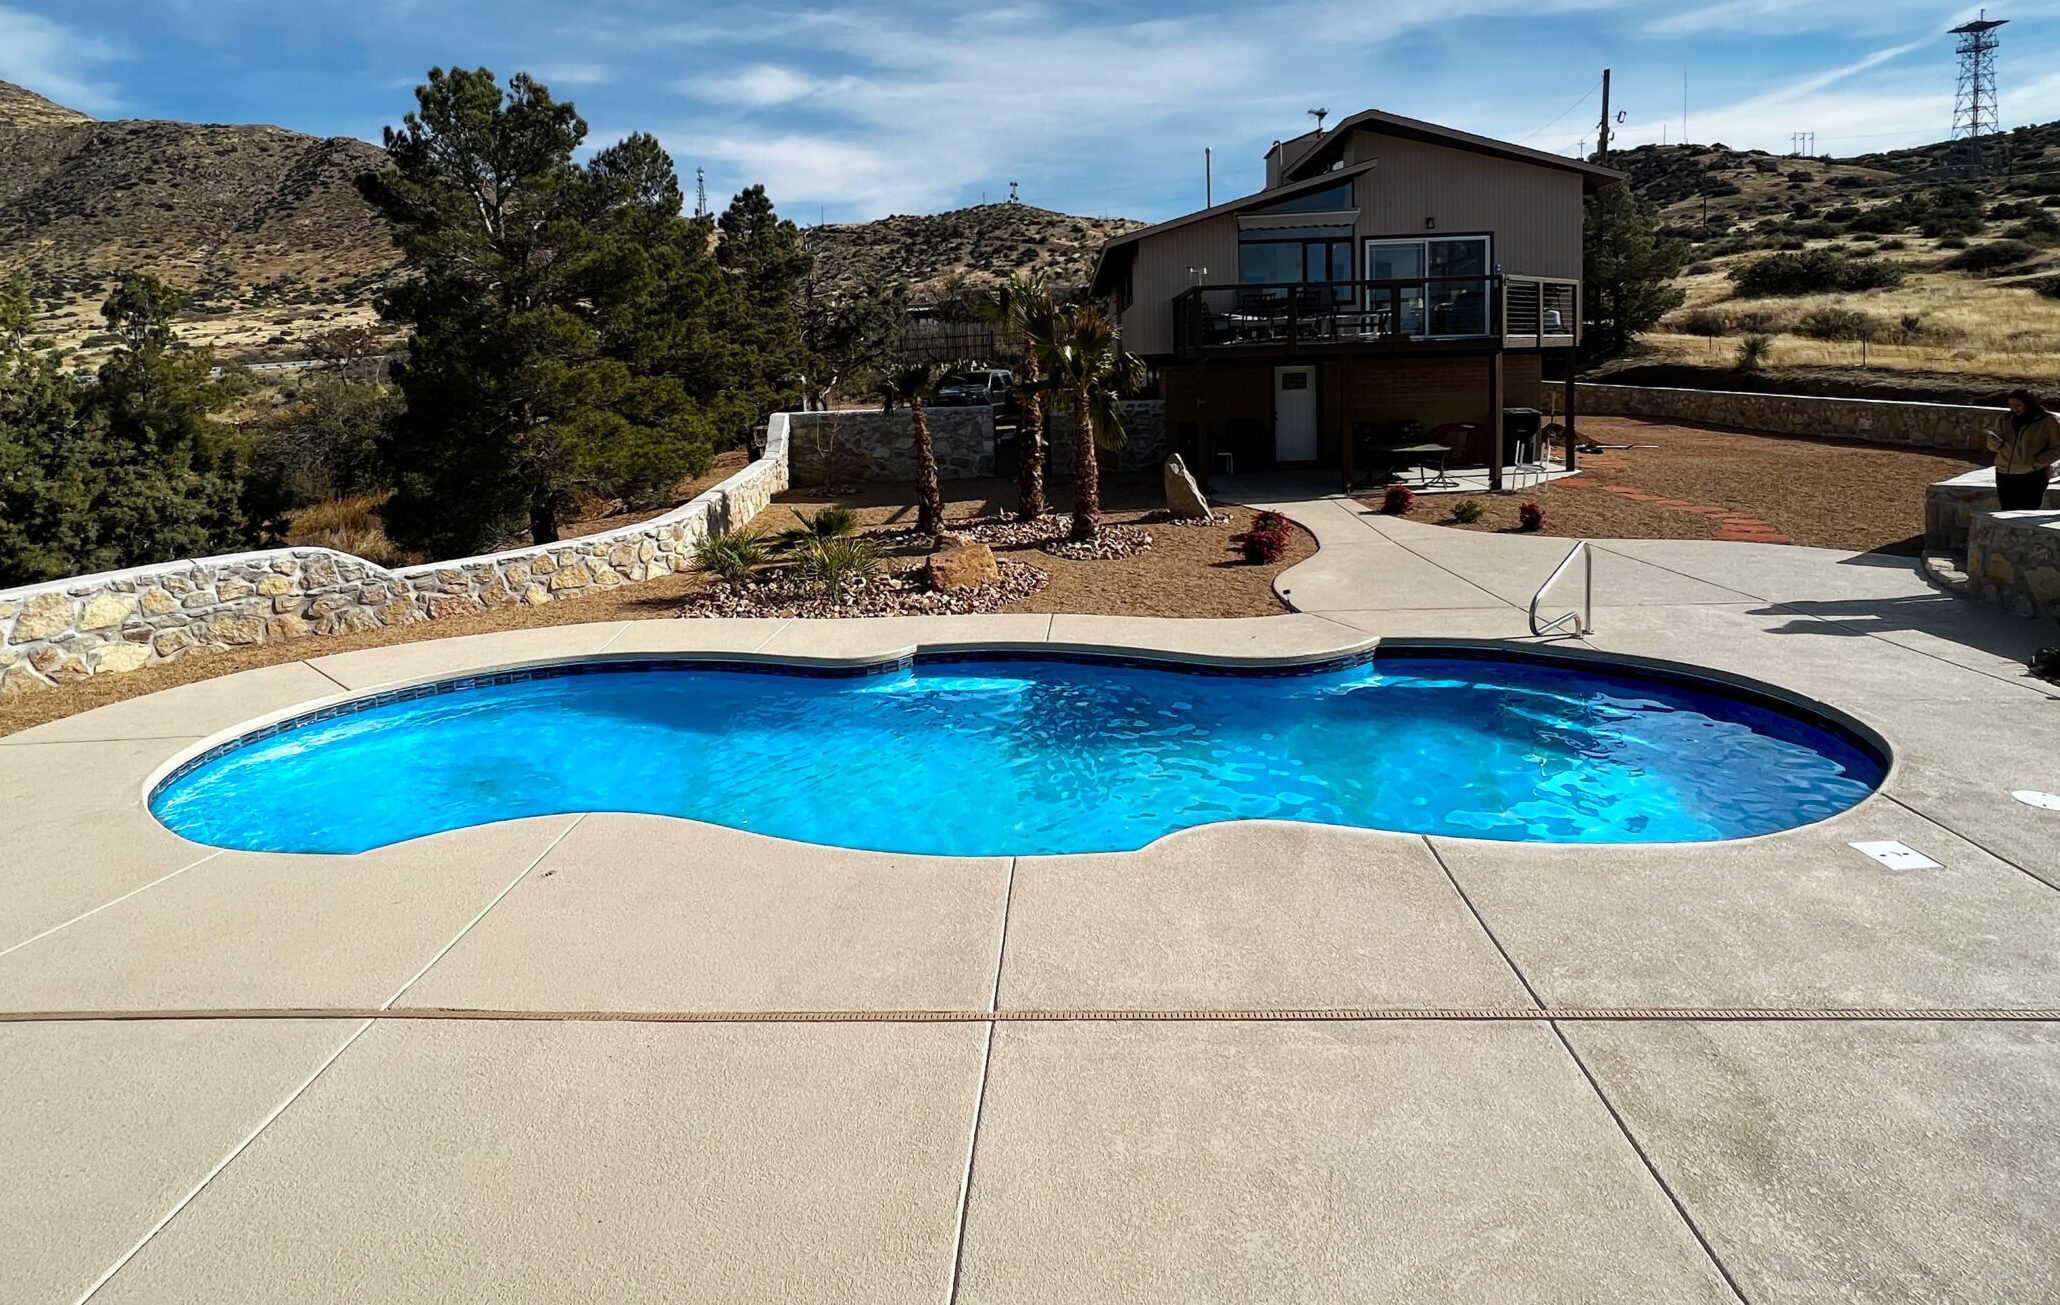 A fully installed fiberglass pool meant to display a finished pool installation.